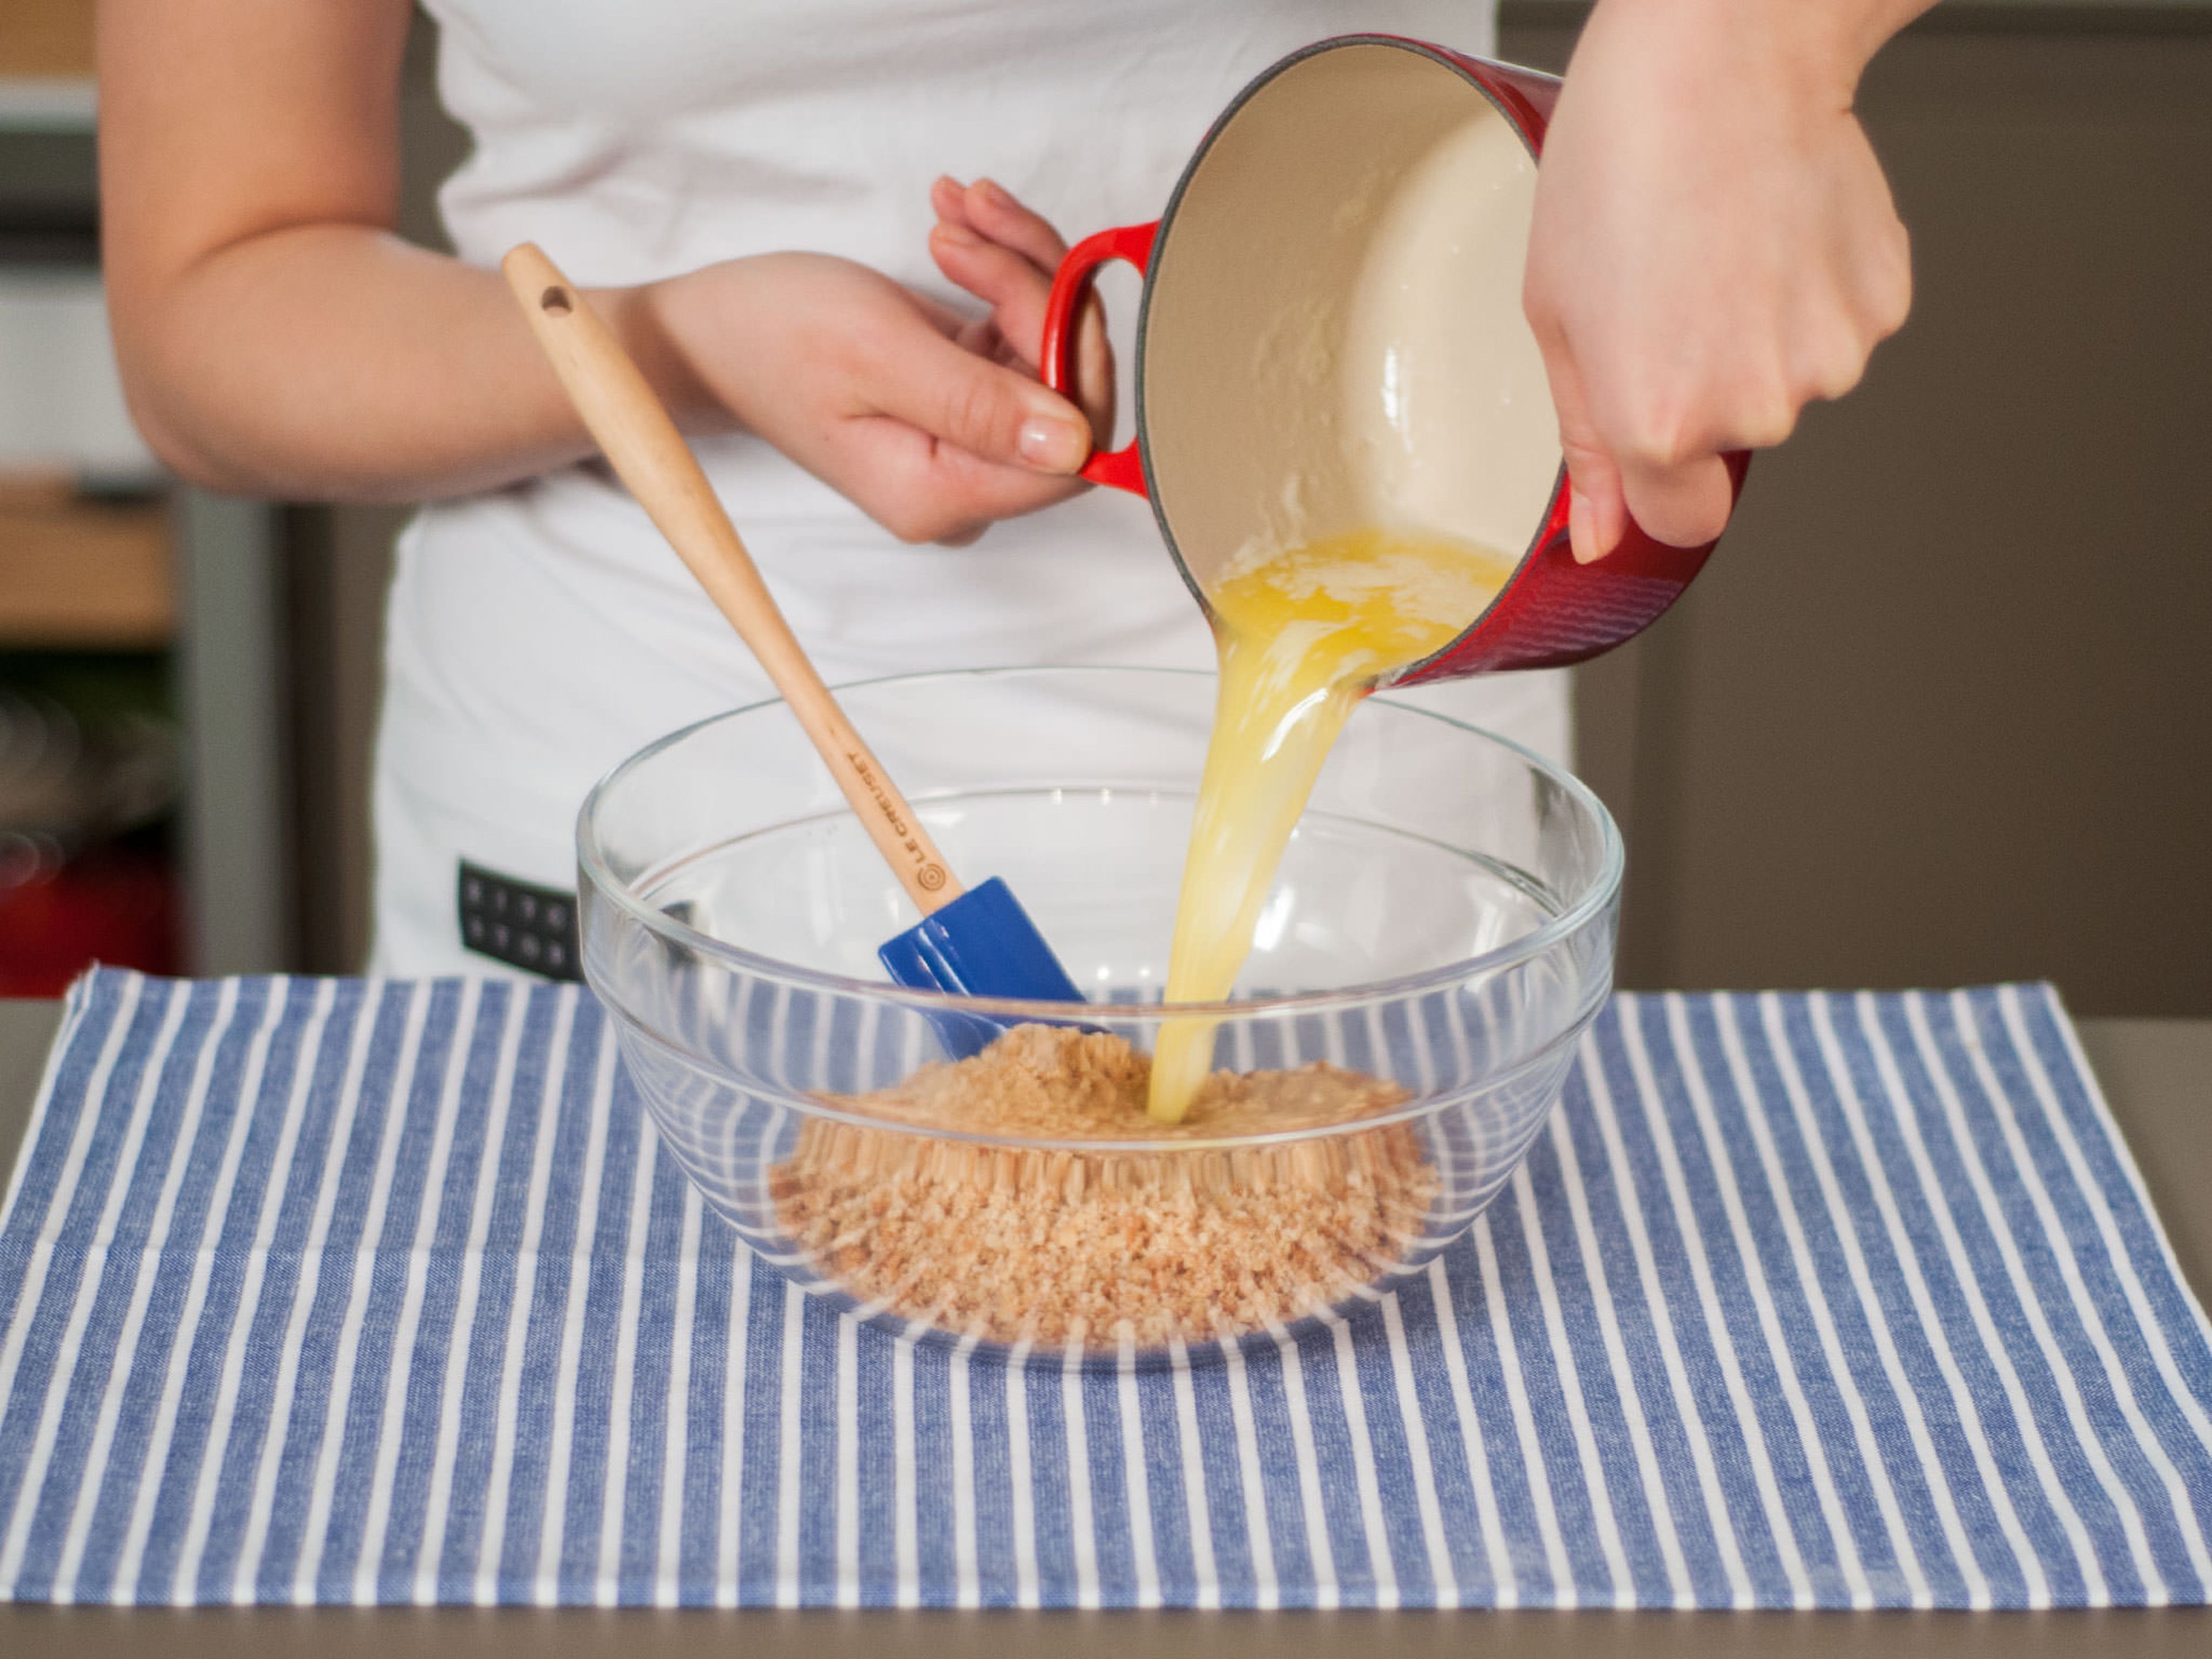 Melt butter in a small pan over medium-low heat. Transfer cookie crumbs to a large bowl, pour in melted butter, and stir until combined.